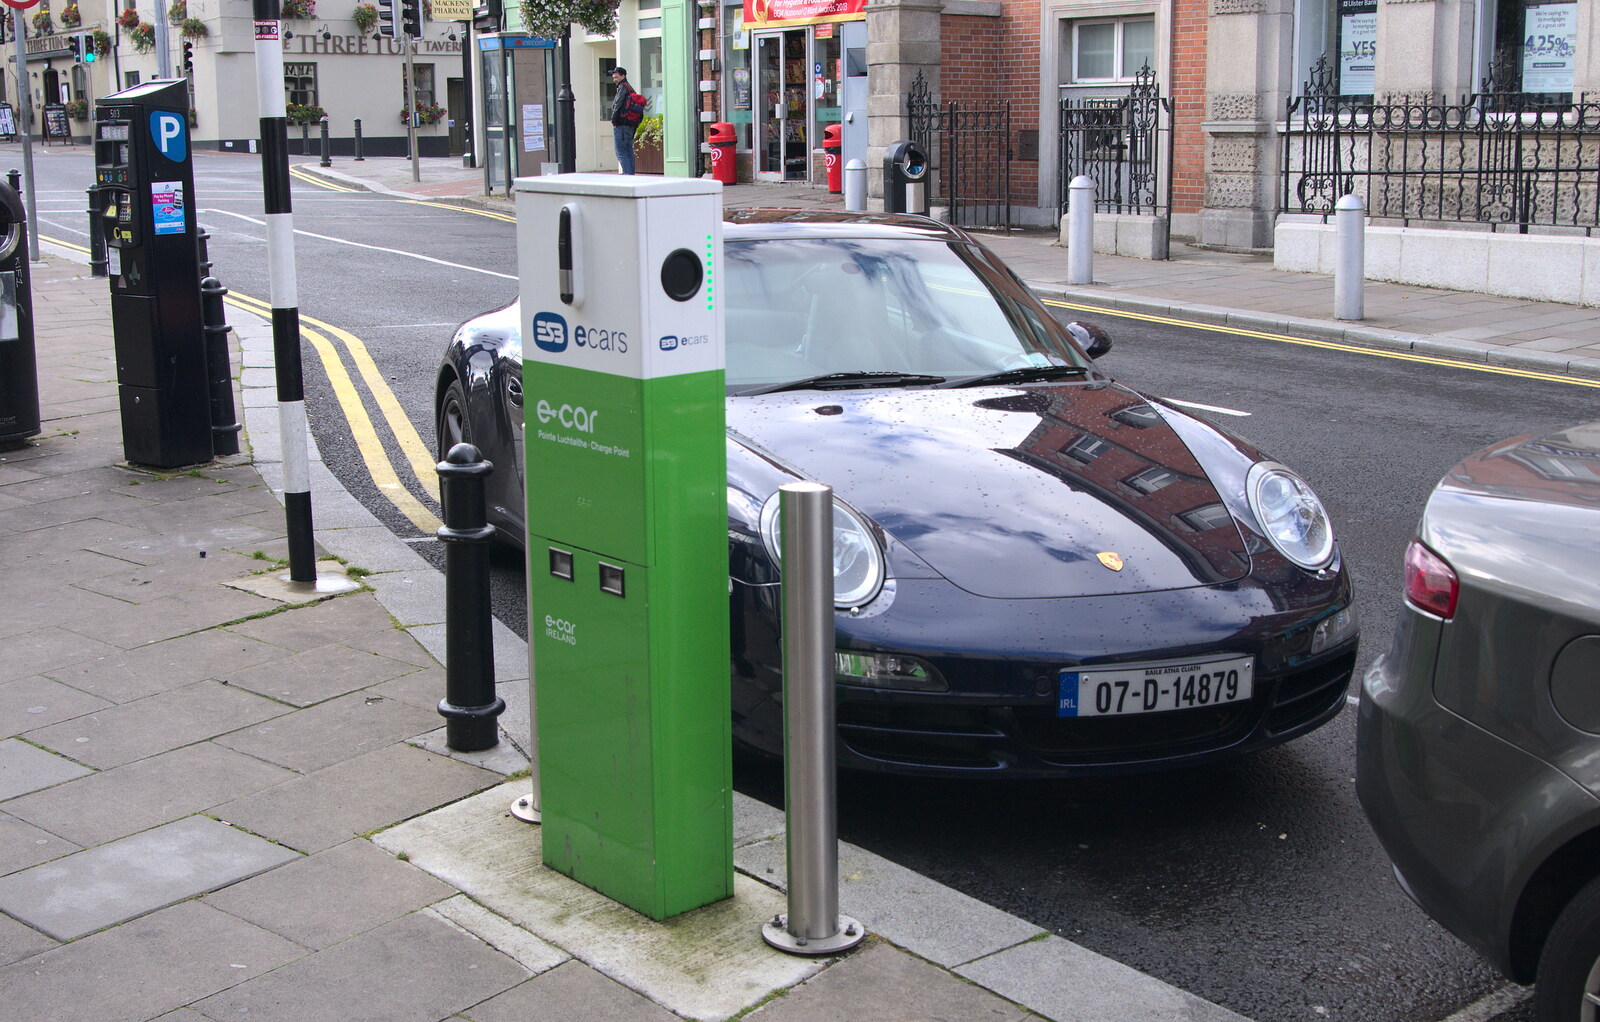 Some fascist has parked on the charging spot from A Night Out in Dublin, County Dublin, Ireland - 9th August 2014